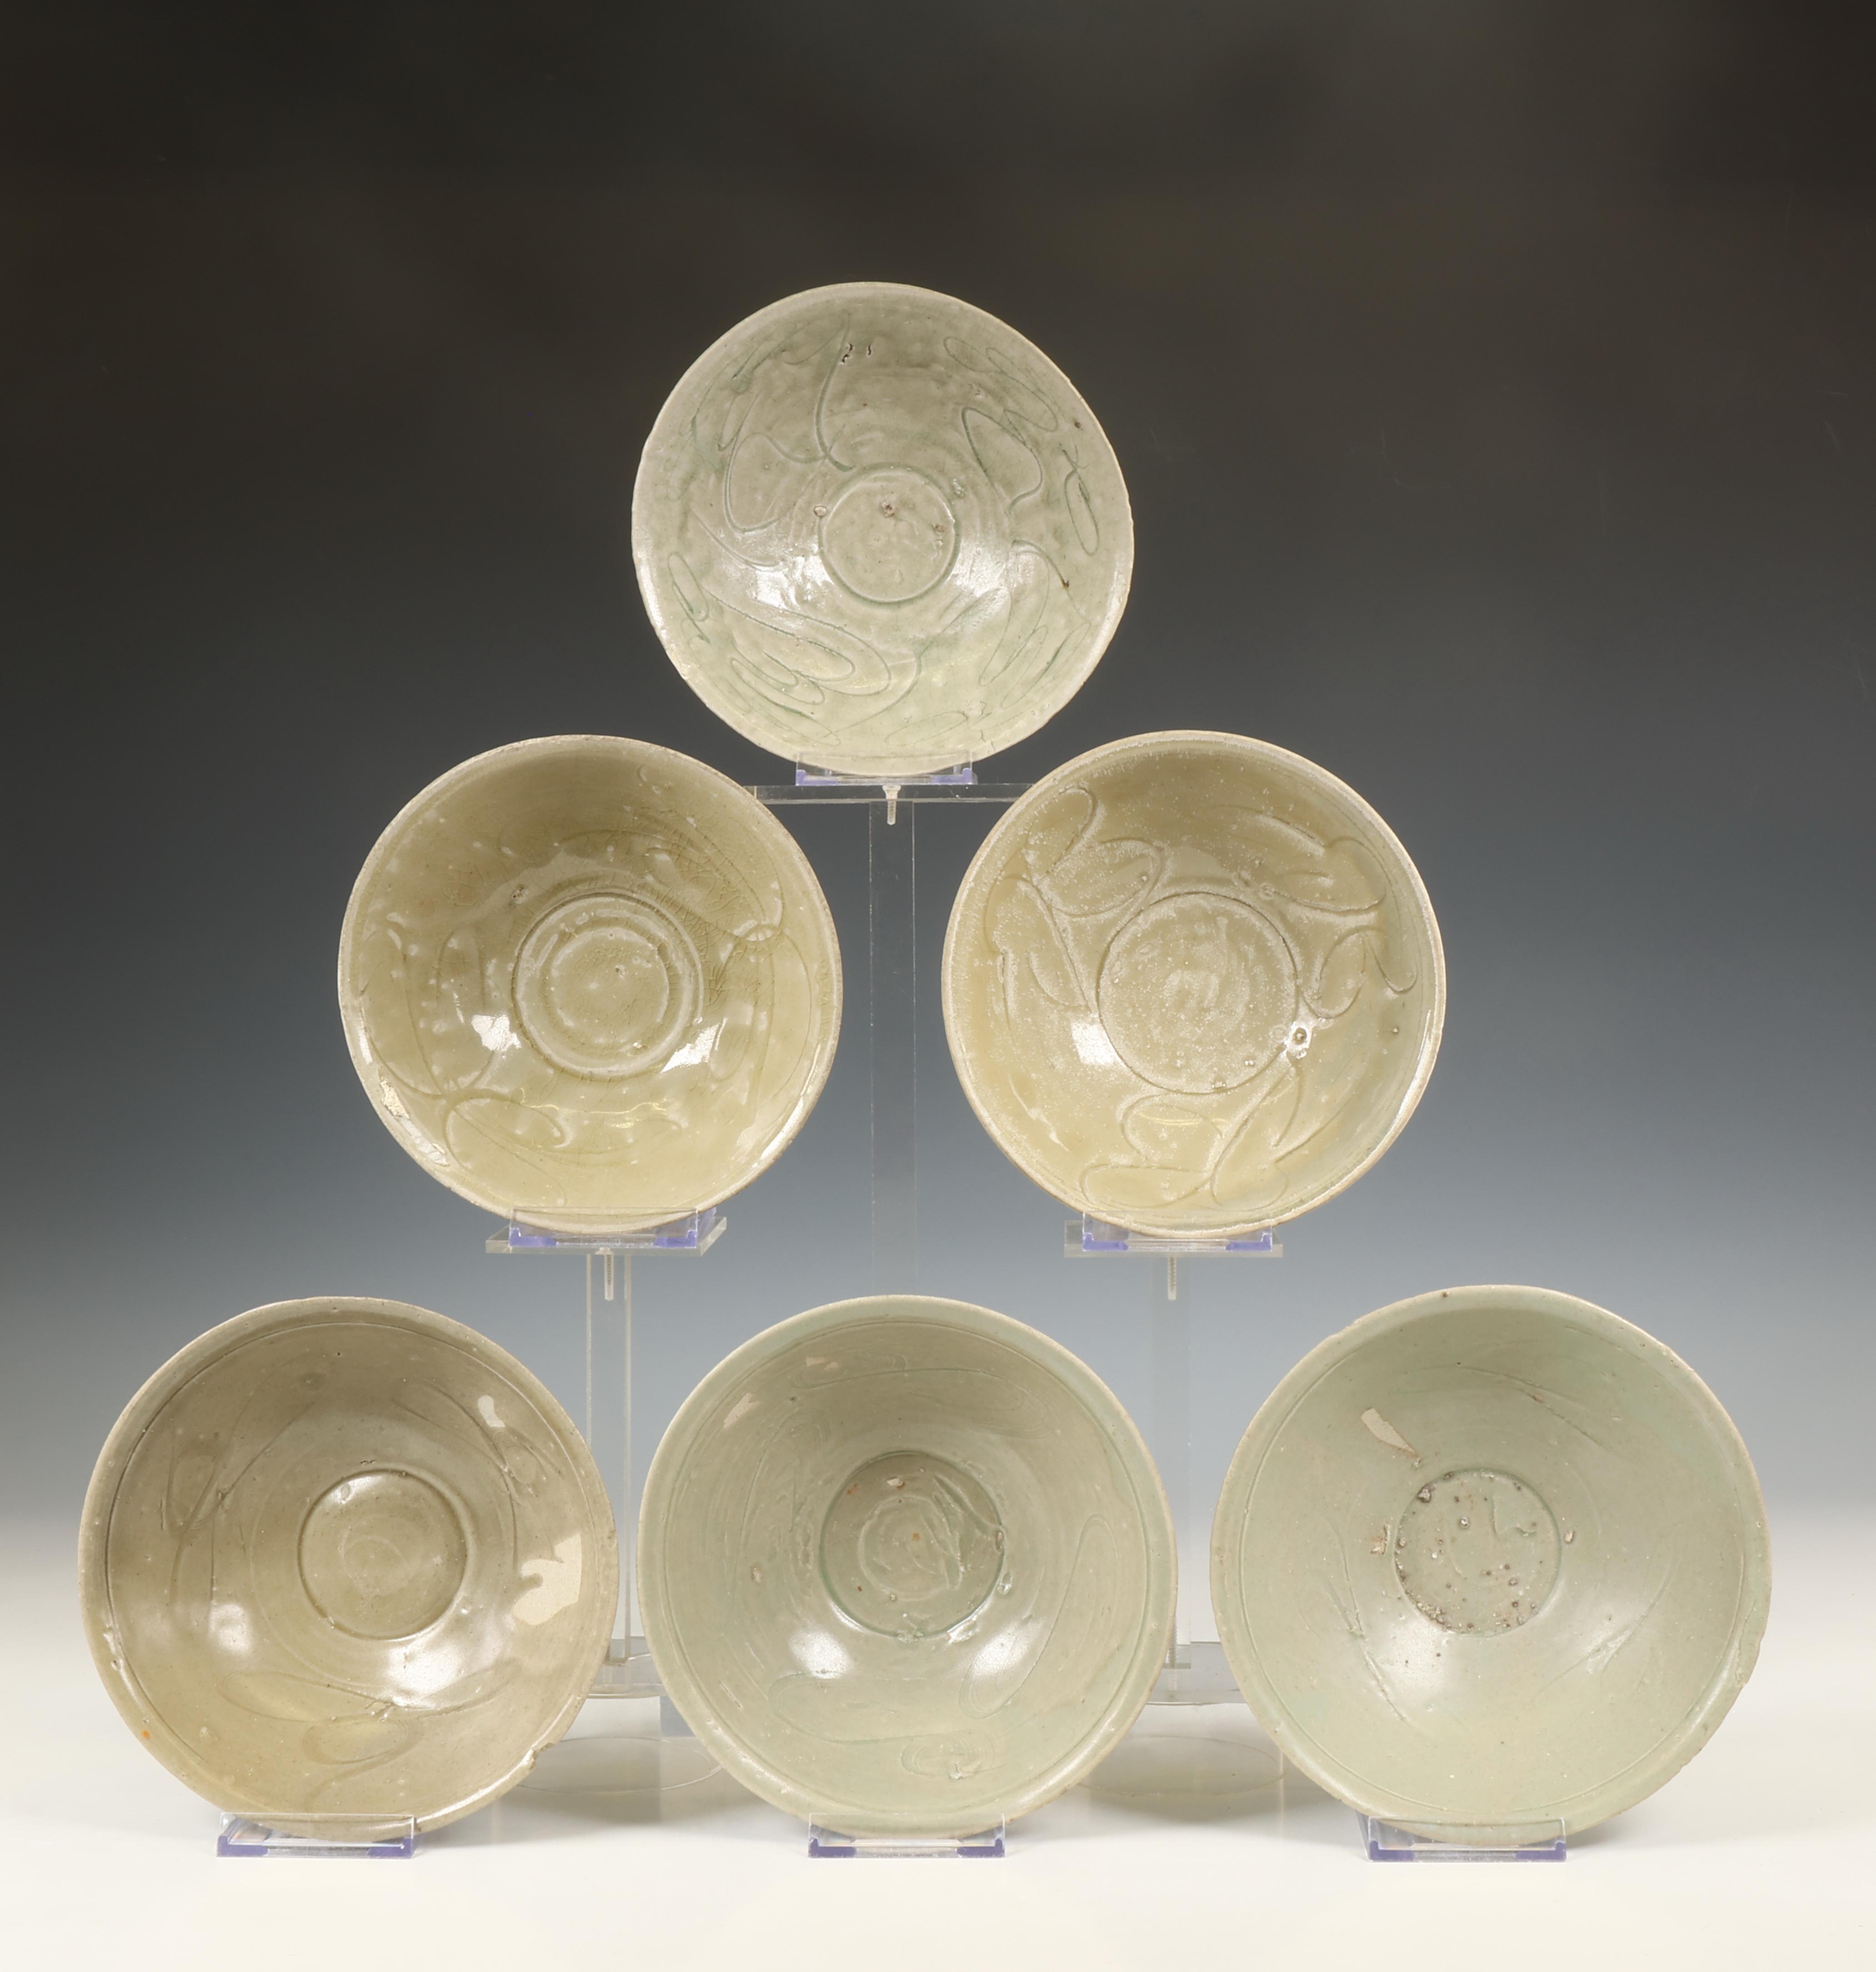 China, collection of various celadon-glazed bowls, Northern Song dynasty, 10th-12th century, - Image 7 of 8